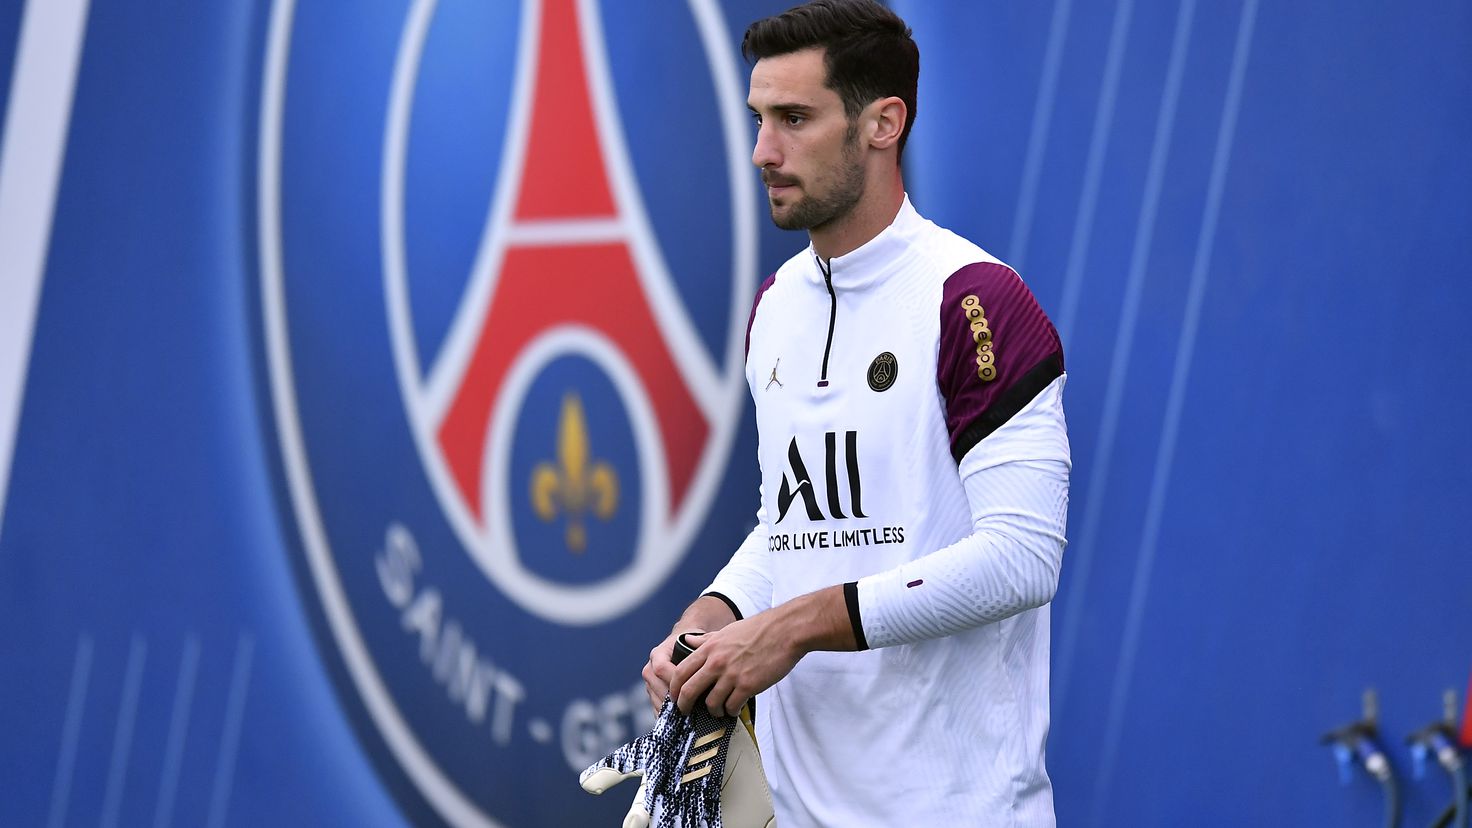 Sergio Rico is once again sedated and in serious condition
